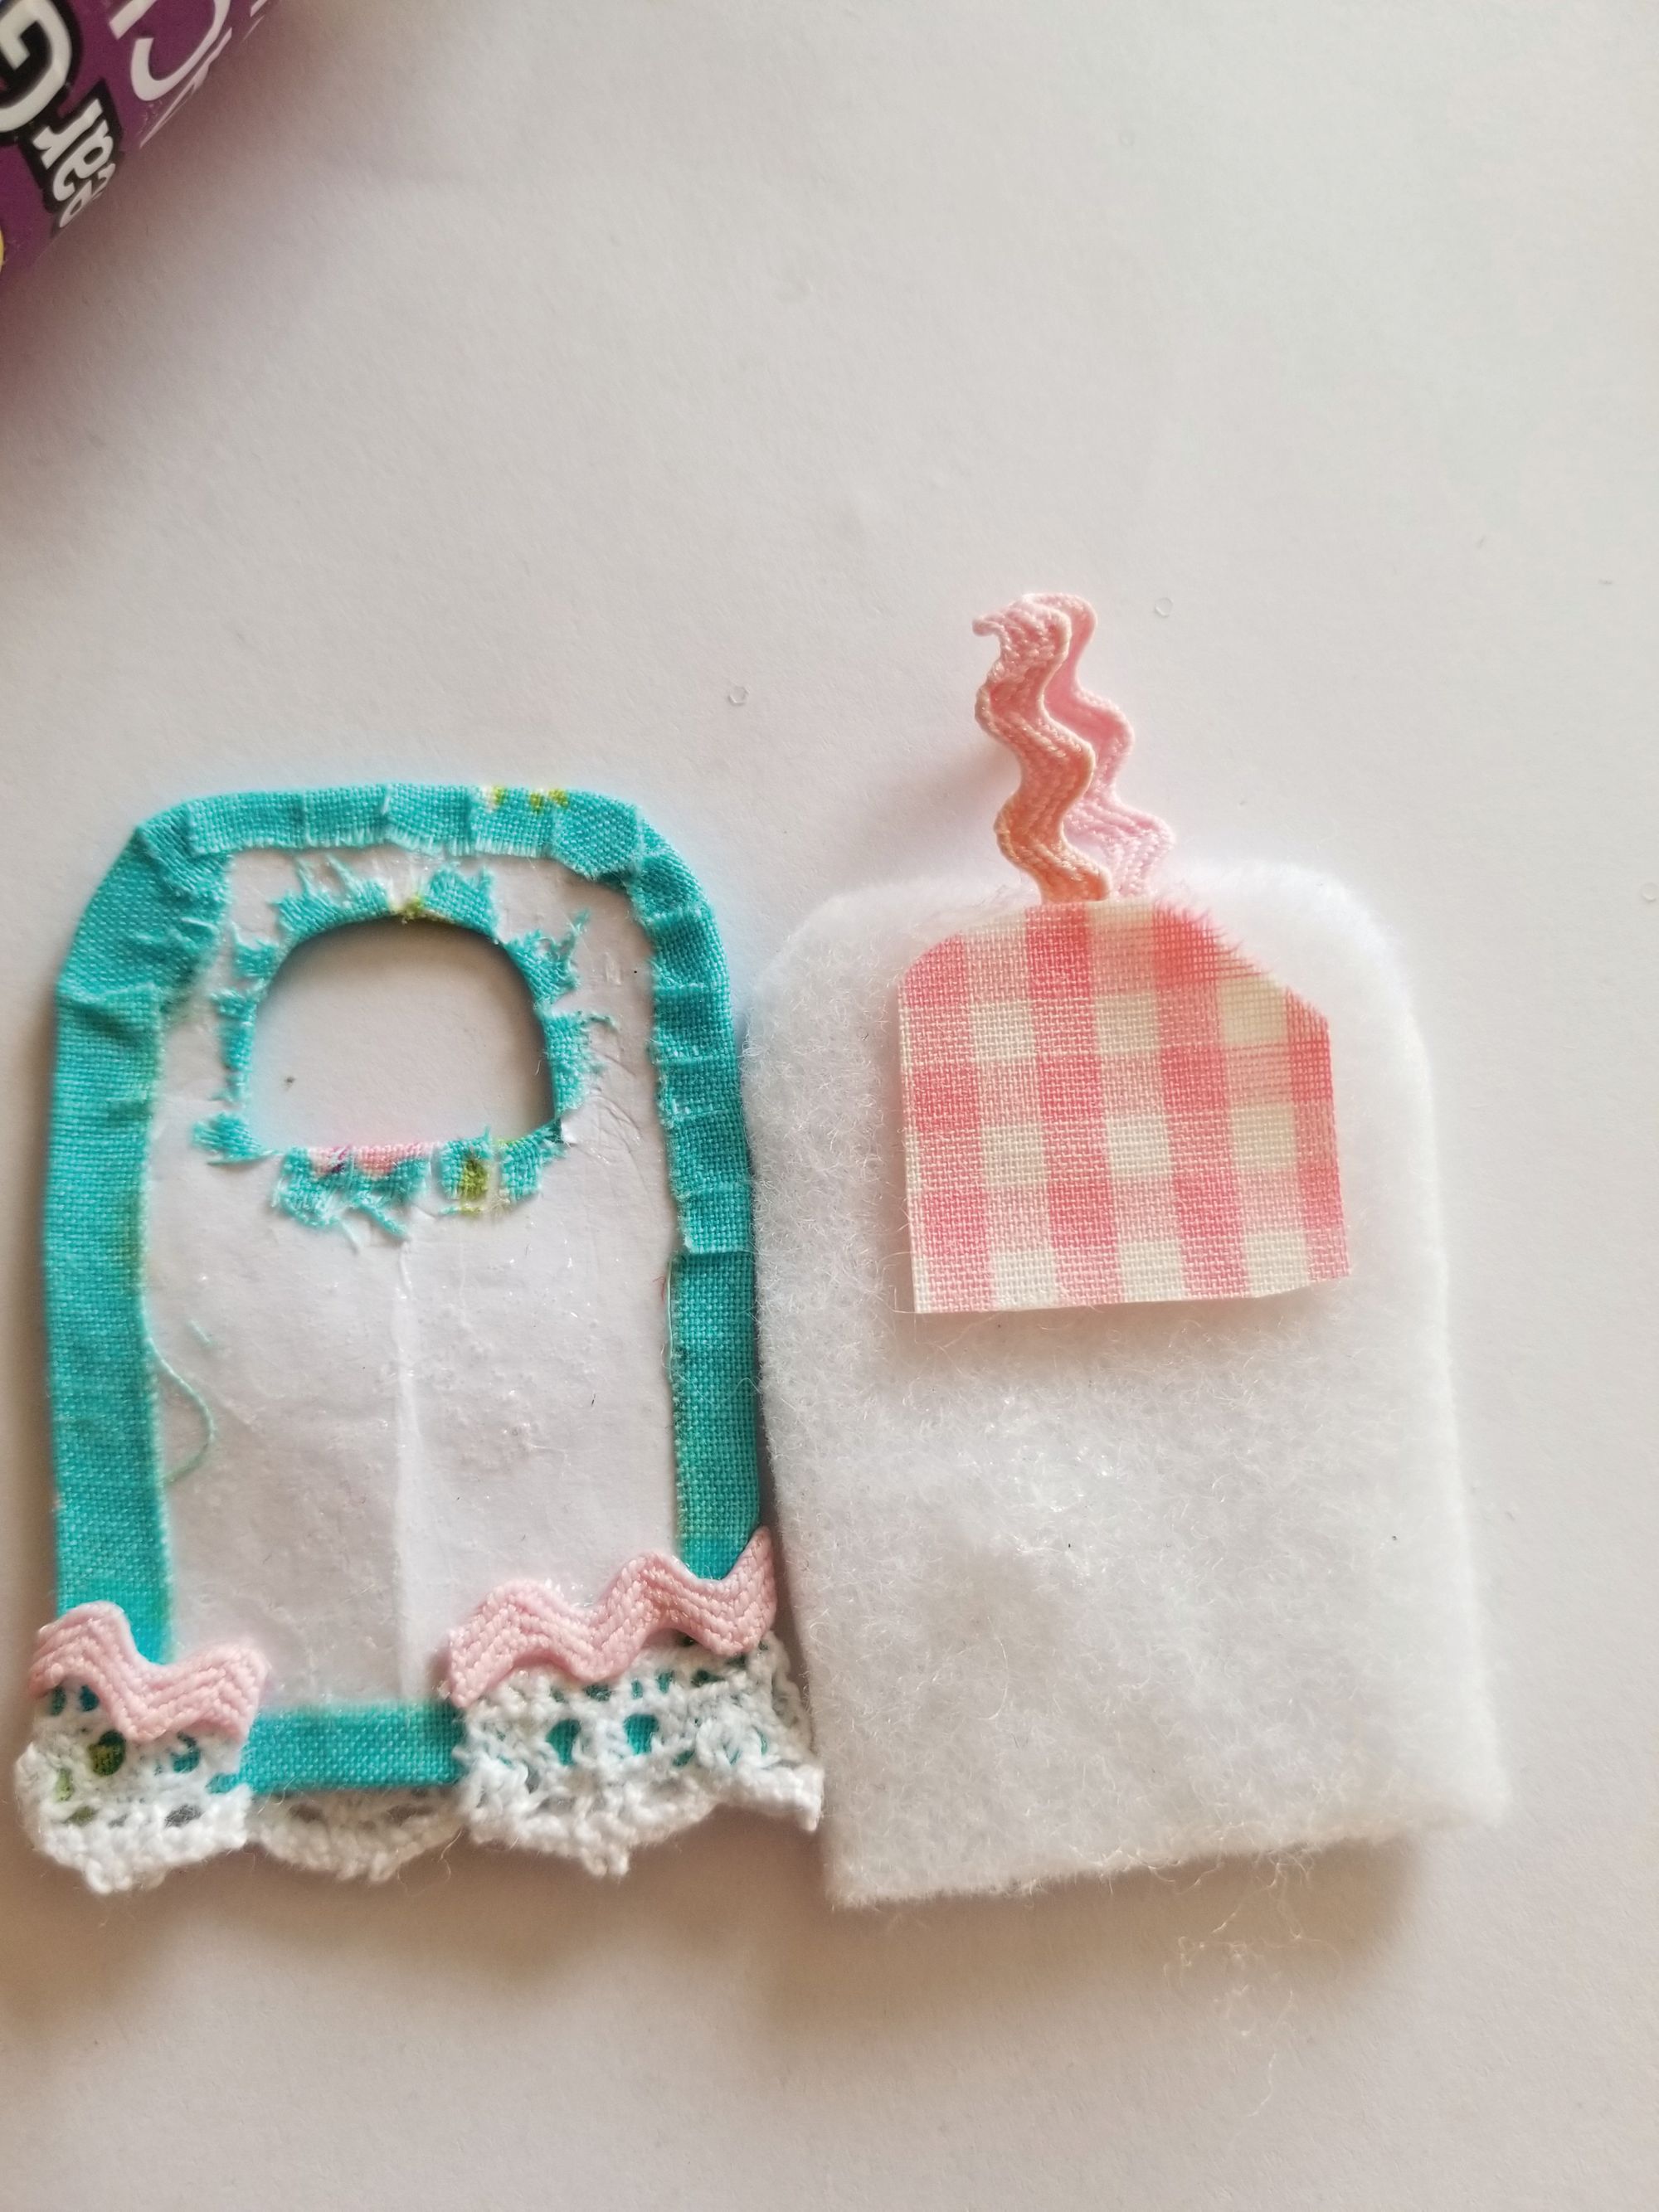 Make a pretty little
bag to hold pegs